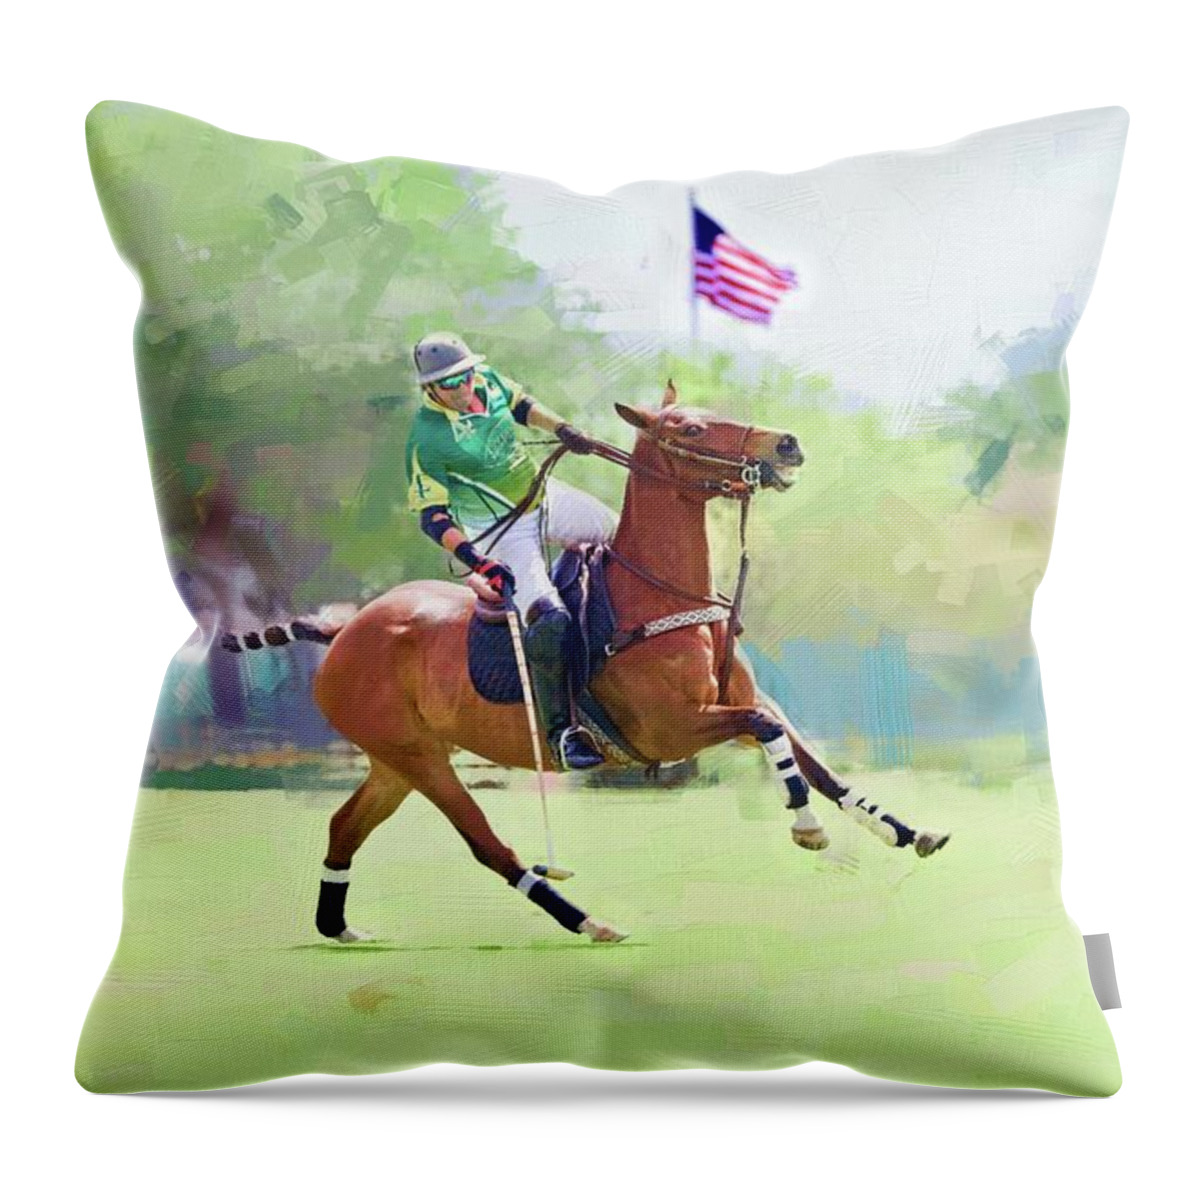 Alicegipsonphotographs Throw Pillow featuring the photograph Throw In by Alice Gipson